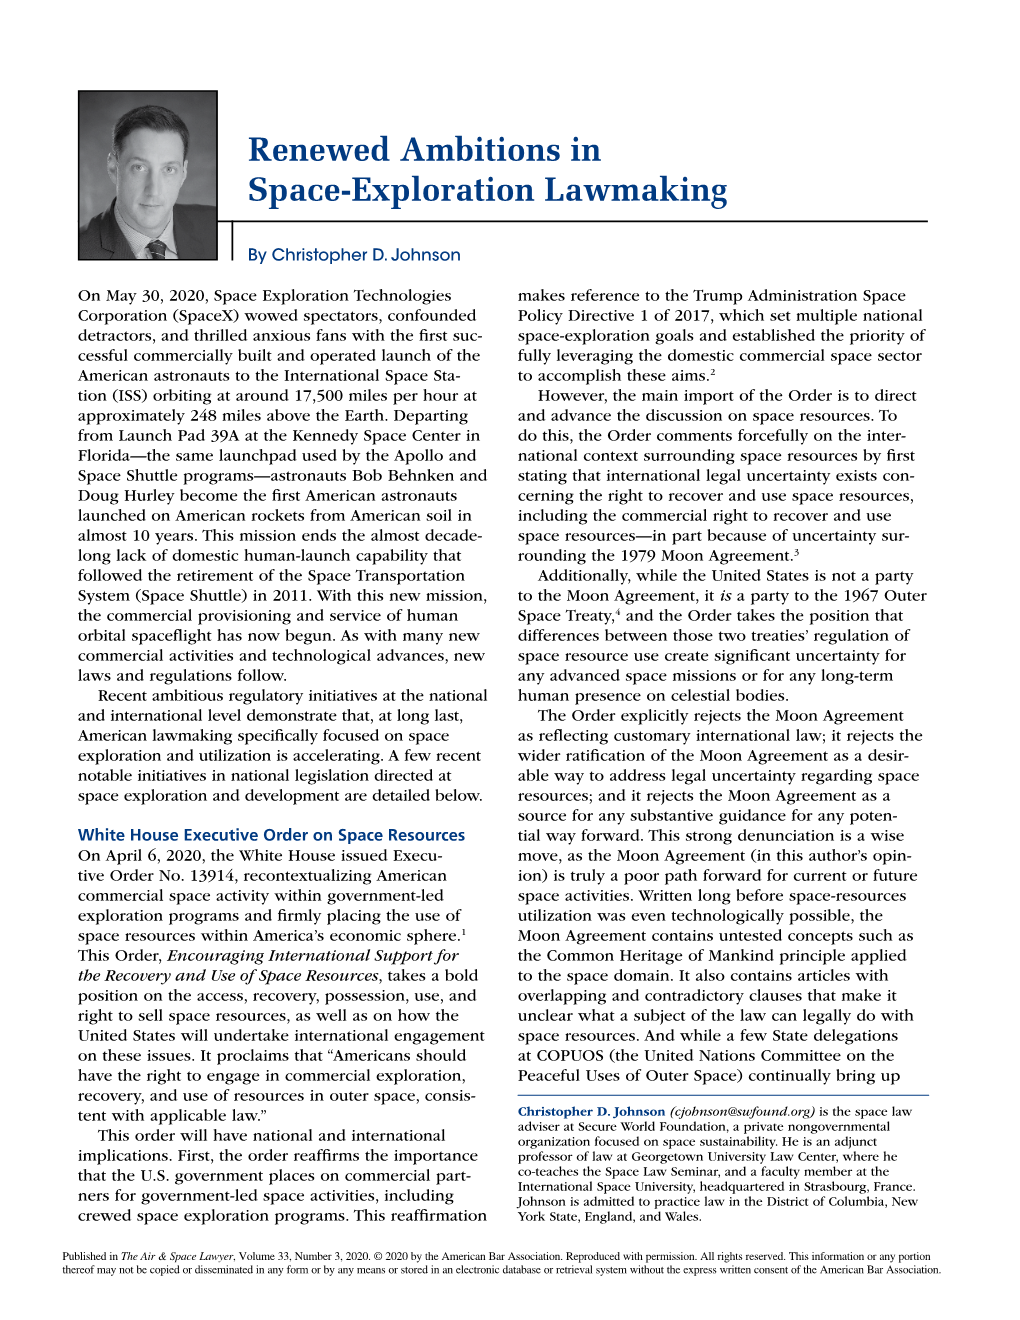 Renewed Ambitions in Space-Exploration Lawmaking